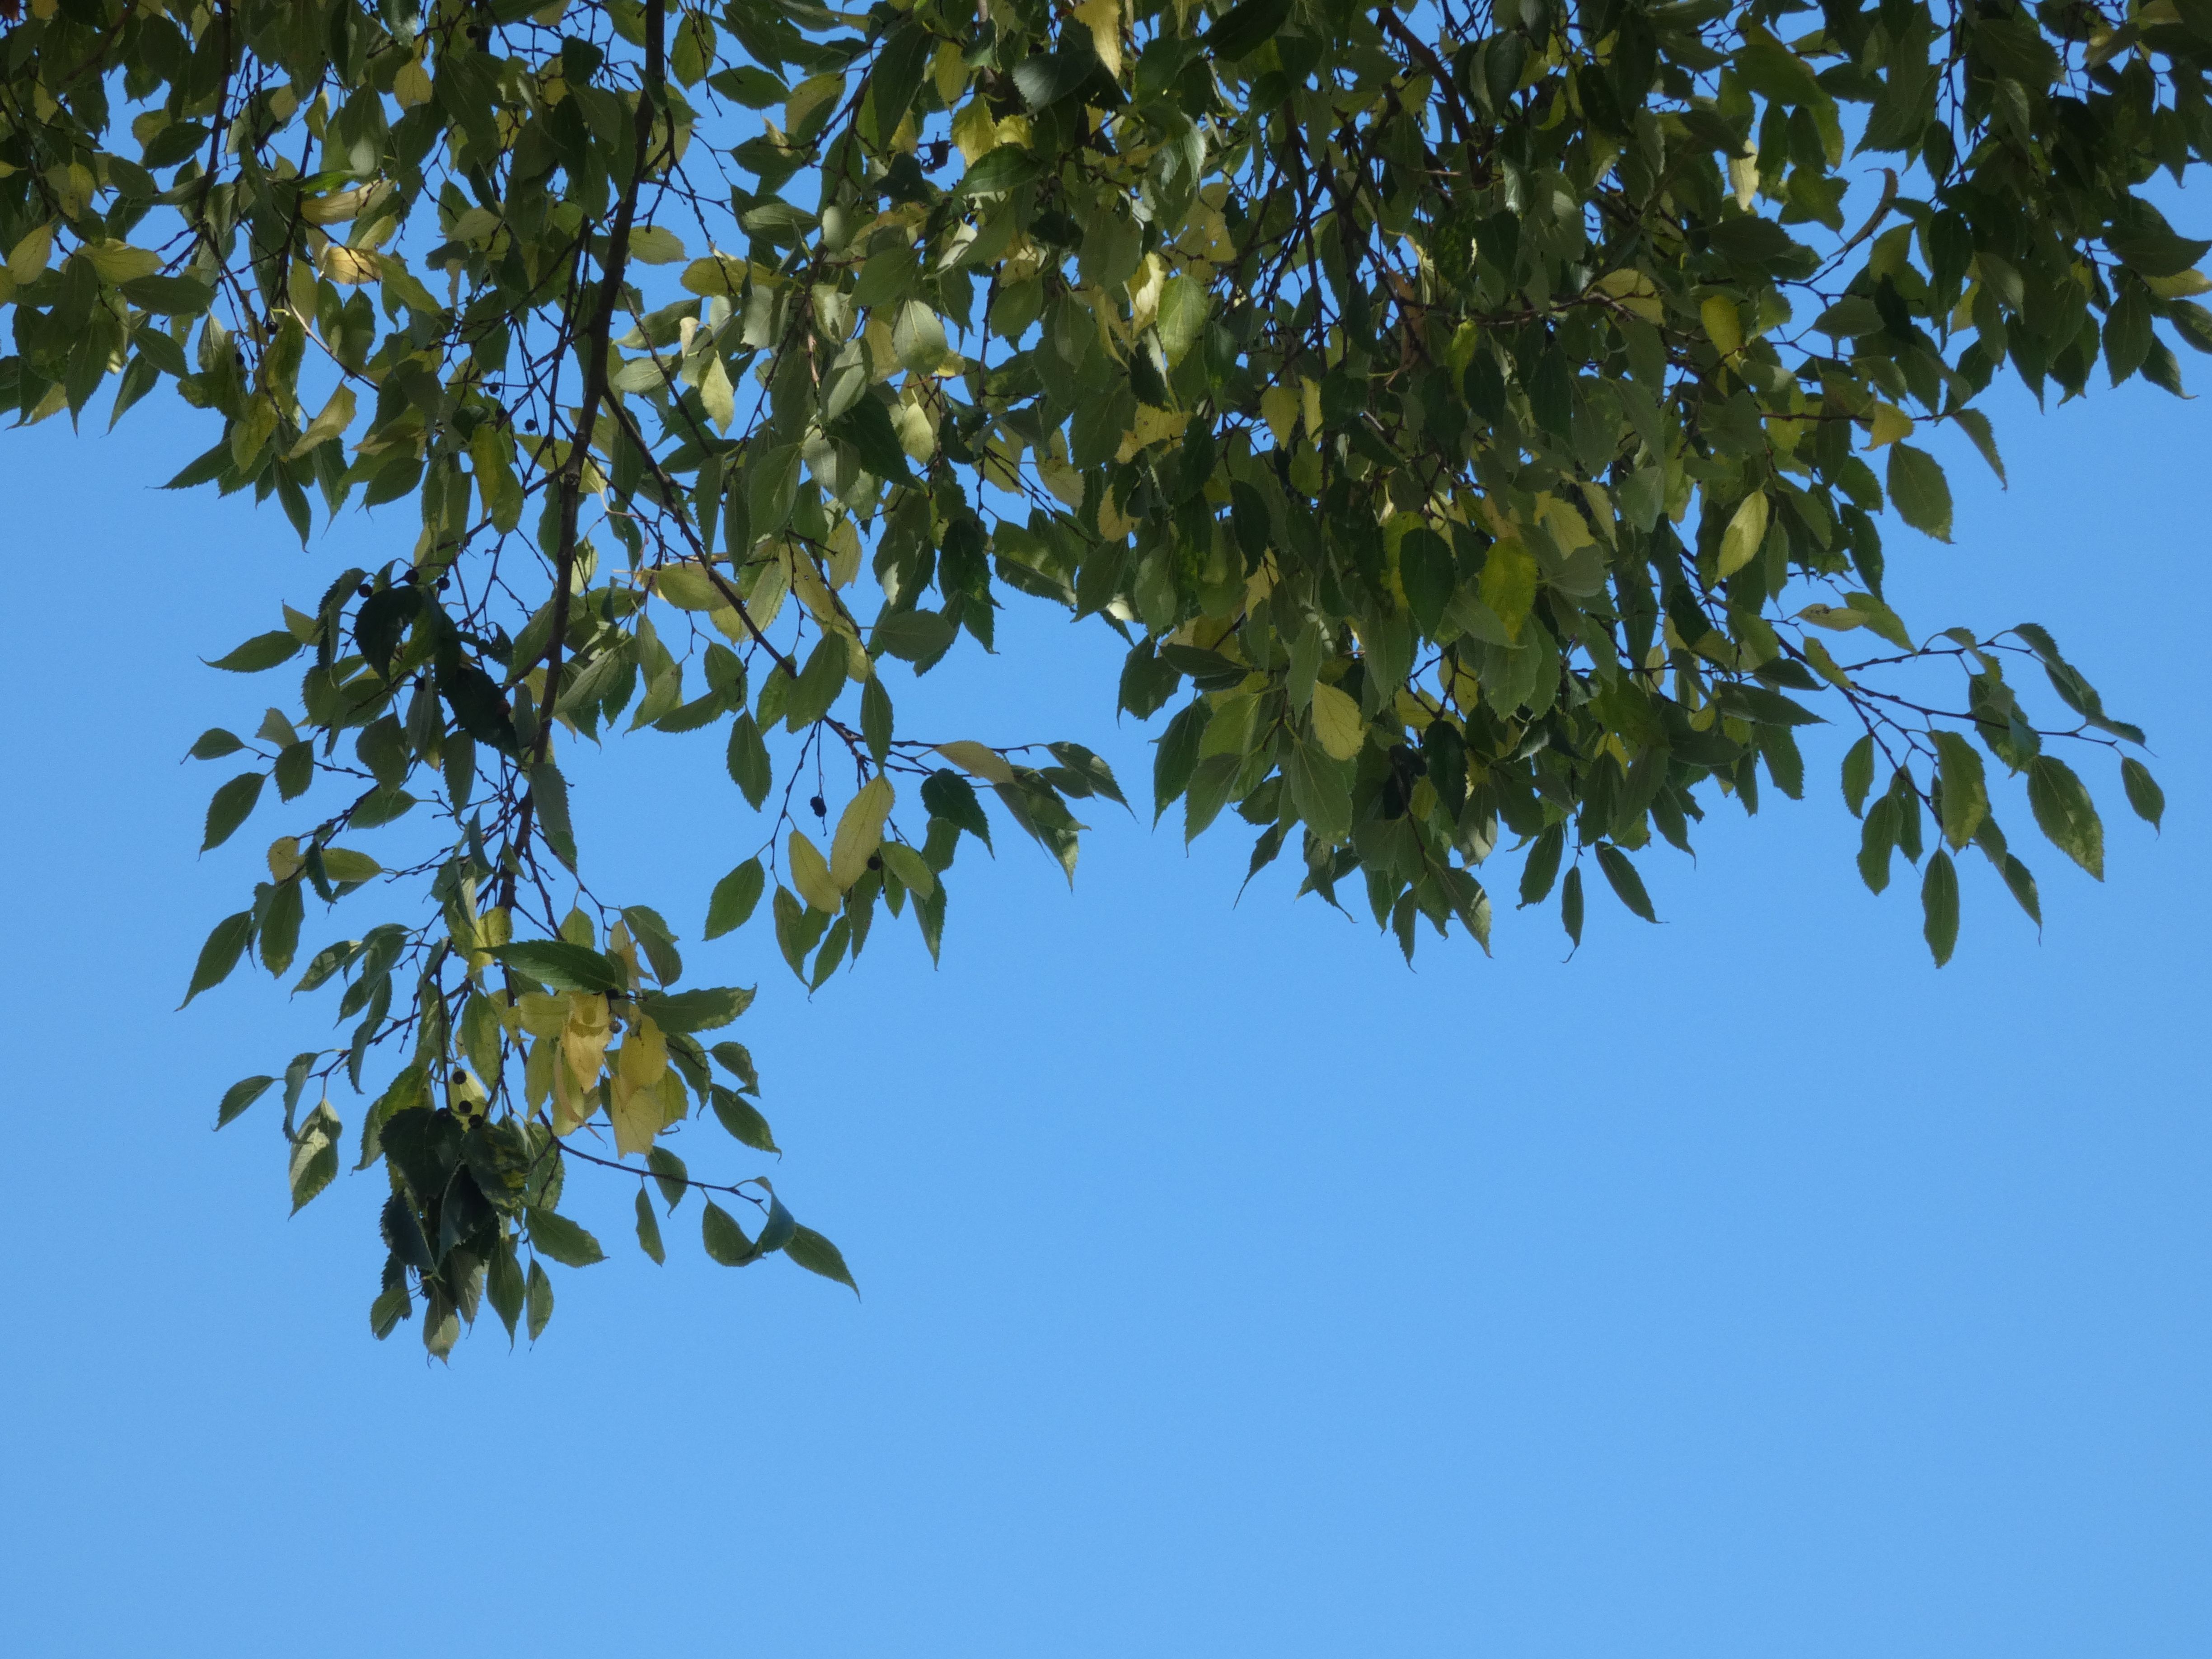 tree leaves from underneath with a blue sky in the background